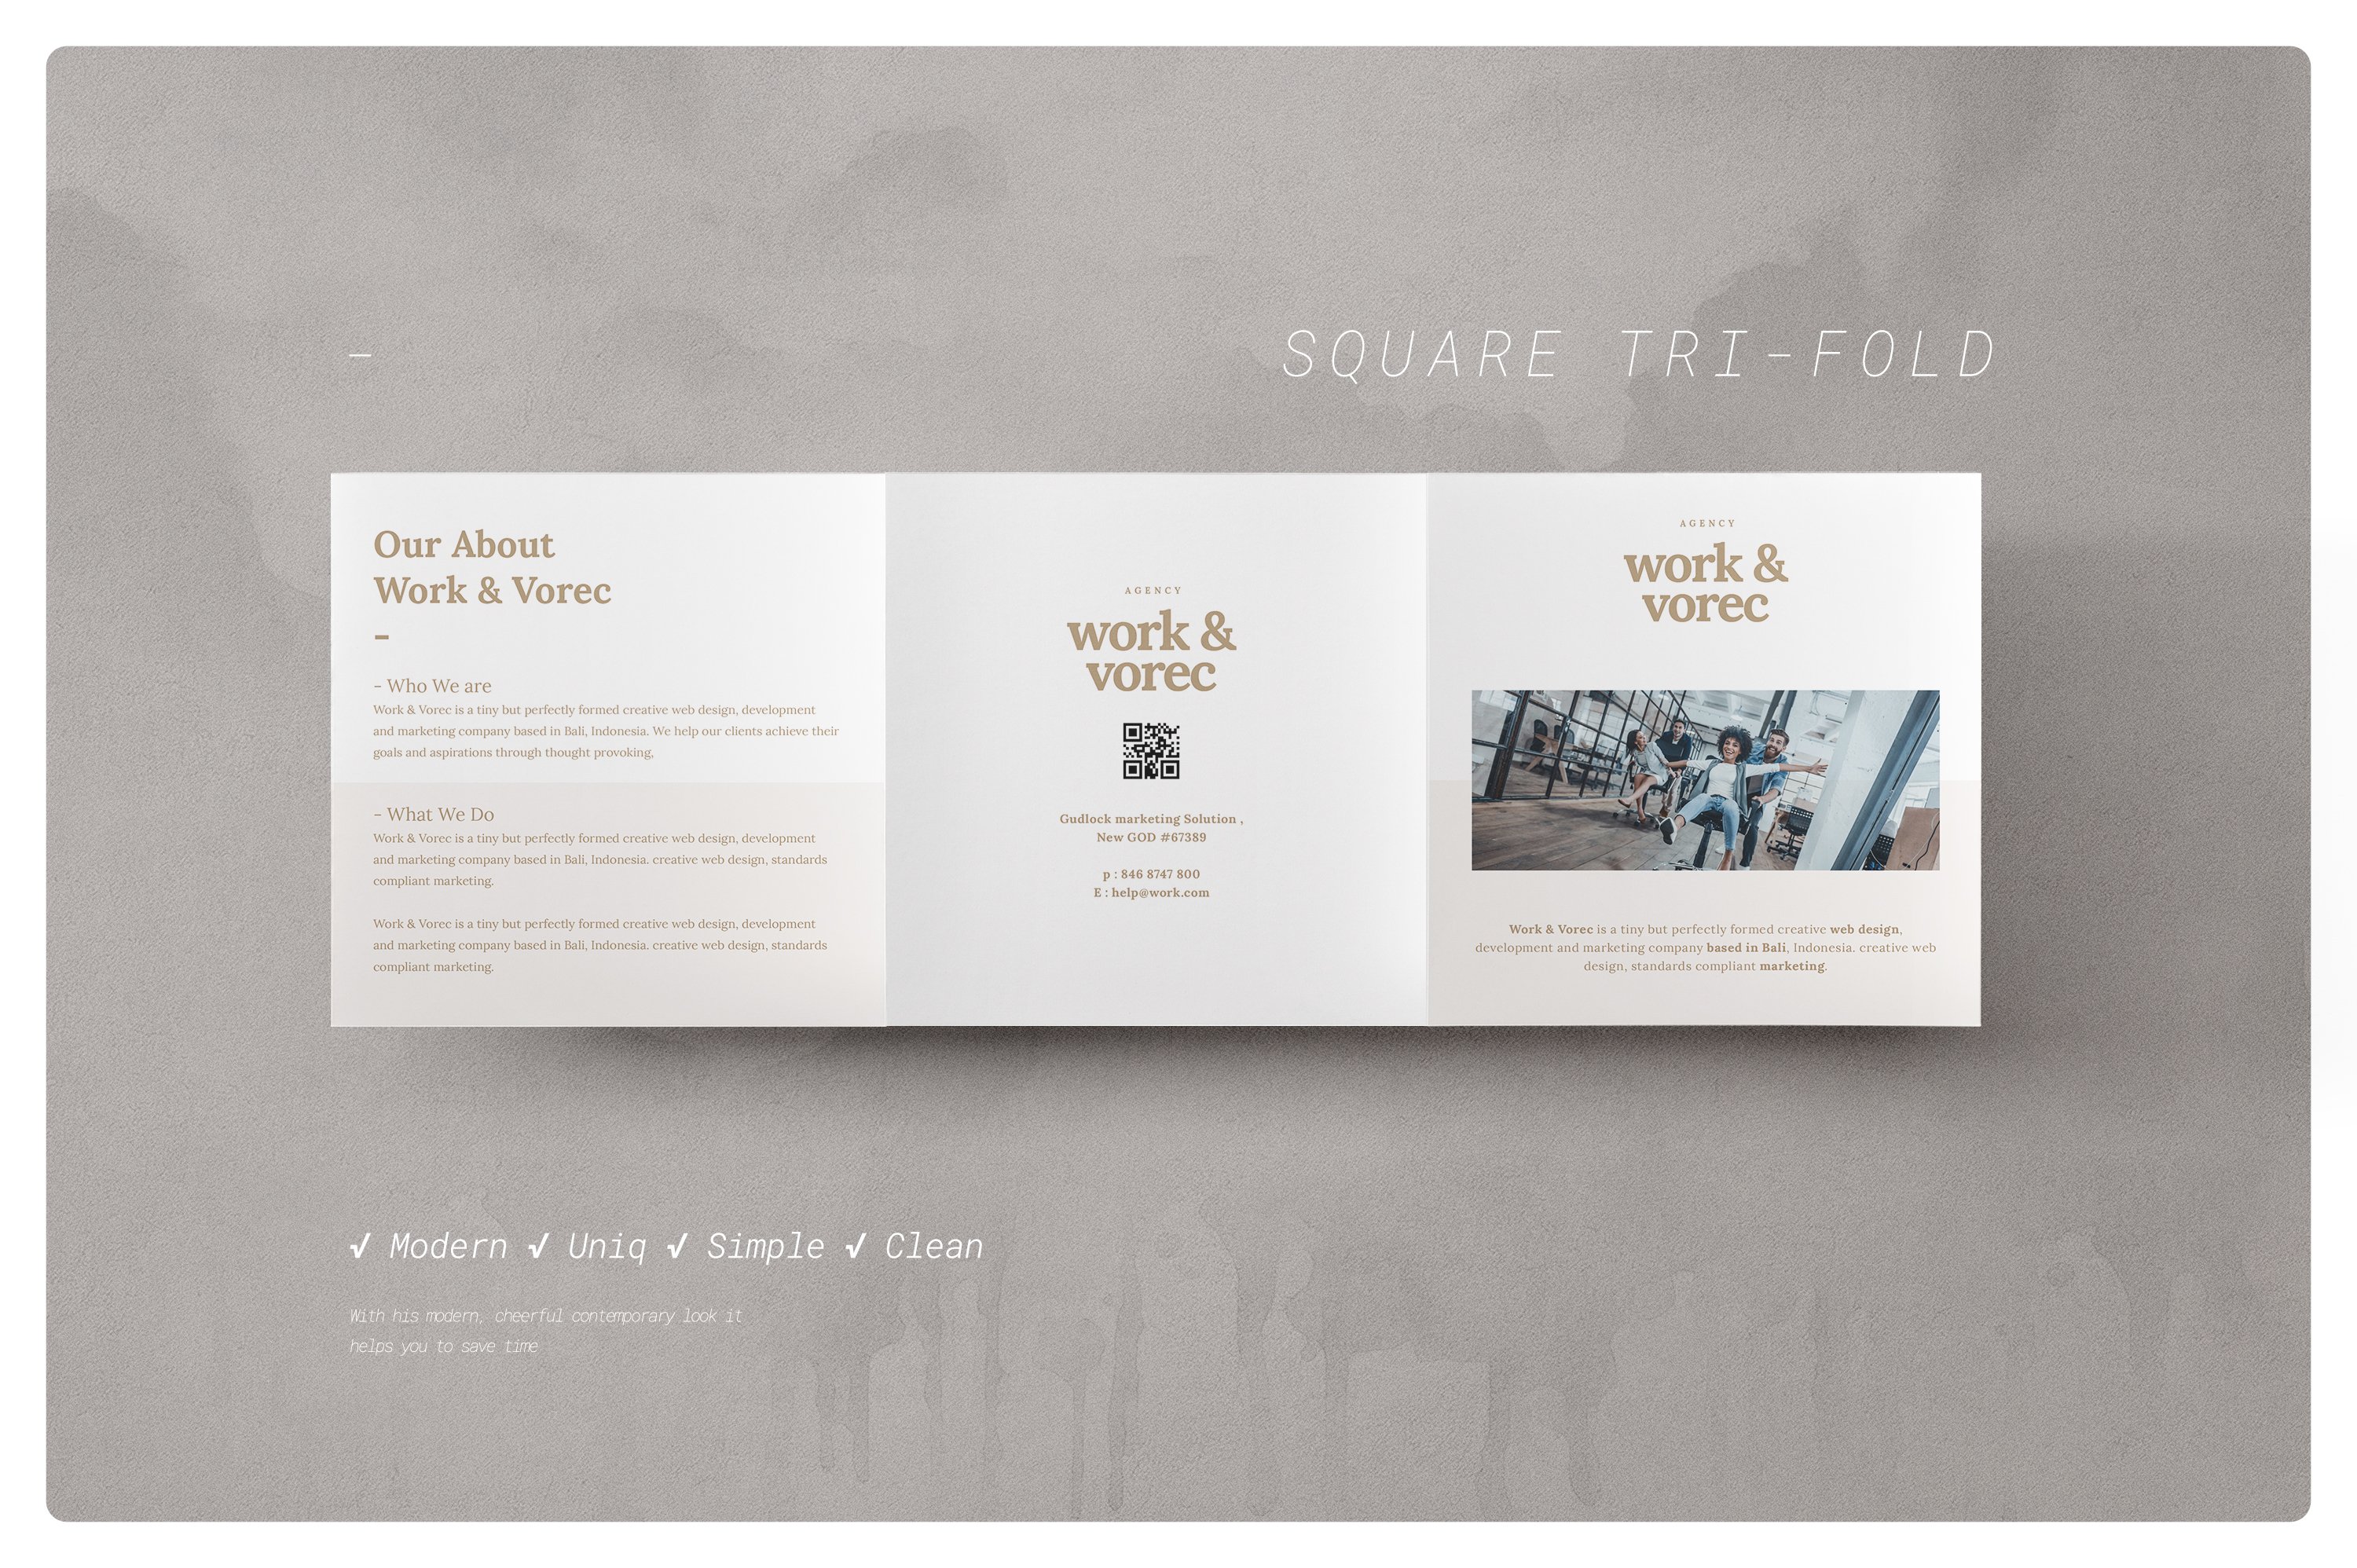 Square Brochure preview image.